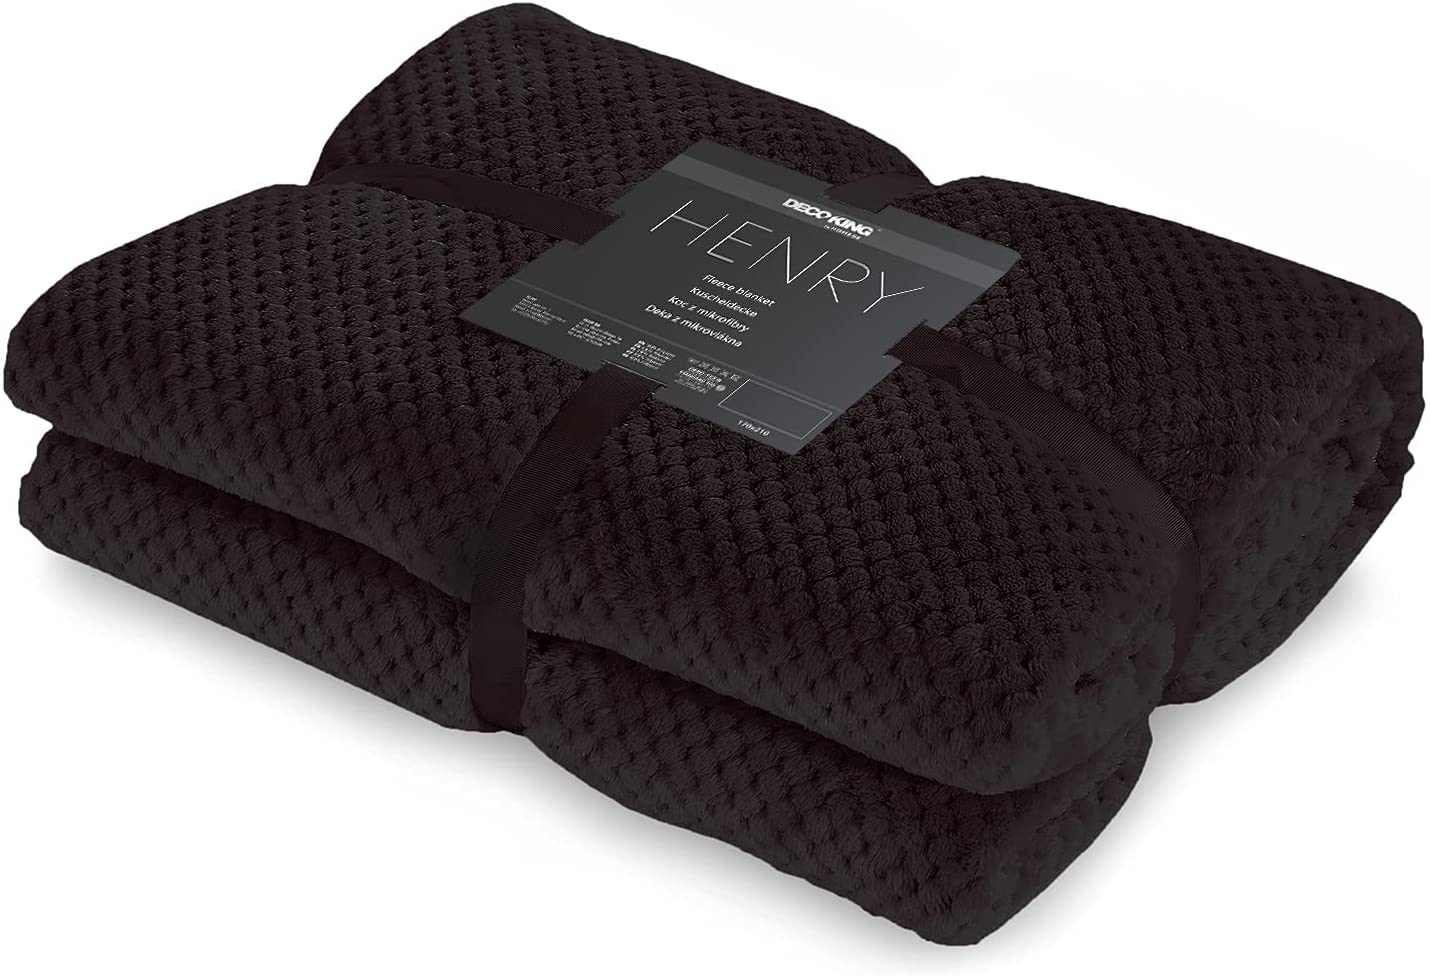 Cuddly blanket black ideal for cinema evenings in the car